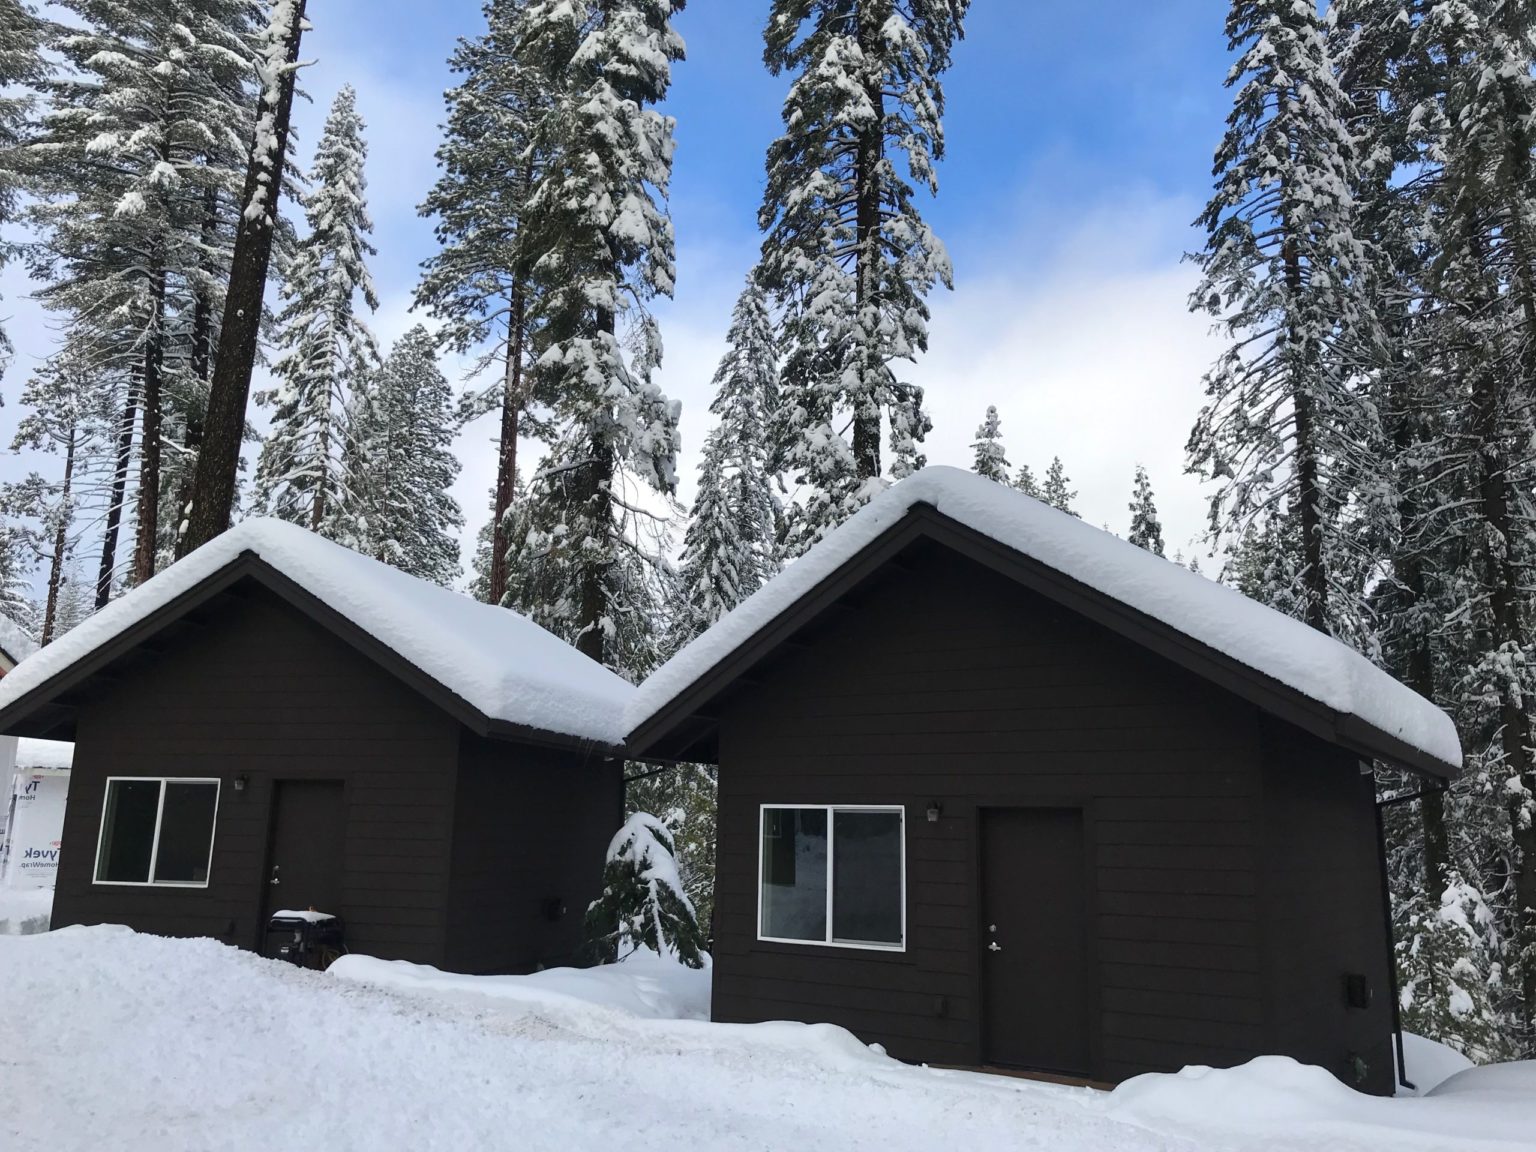 2 new winterized cabins at Camp Oski, which are dark brown, covered in snow, and nestled in a backdrop of snowy pine trees and blue skies.